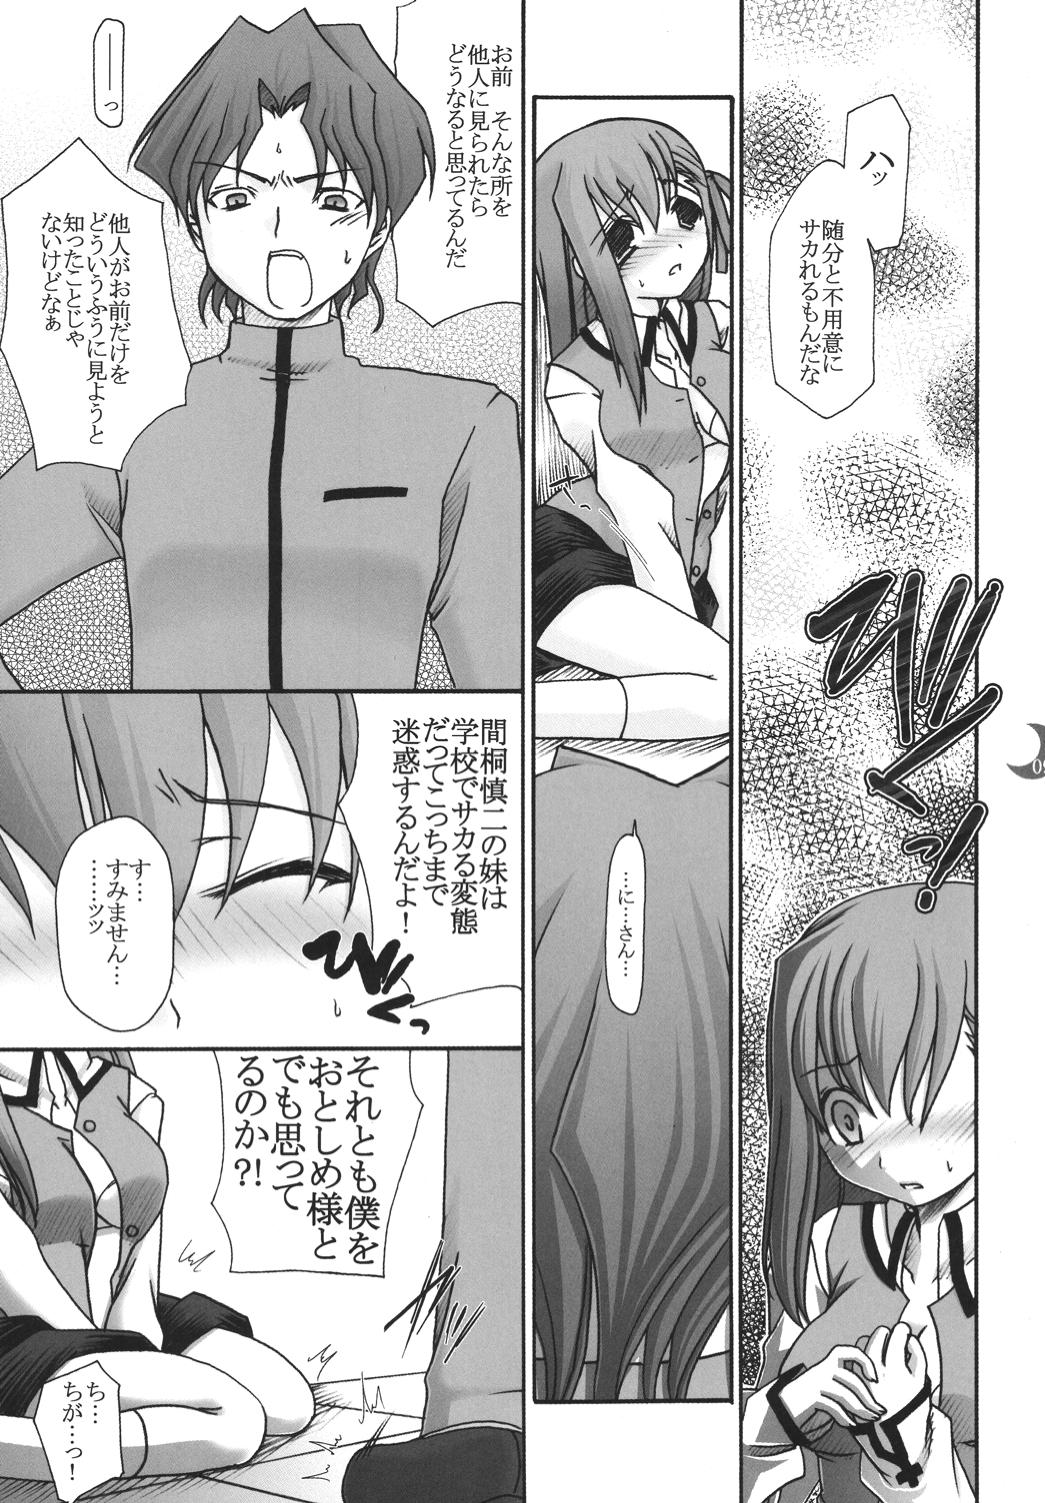 Cfnm Hatsujou Toiki - Fate stay night Gay Trimmed - Page 8